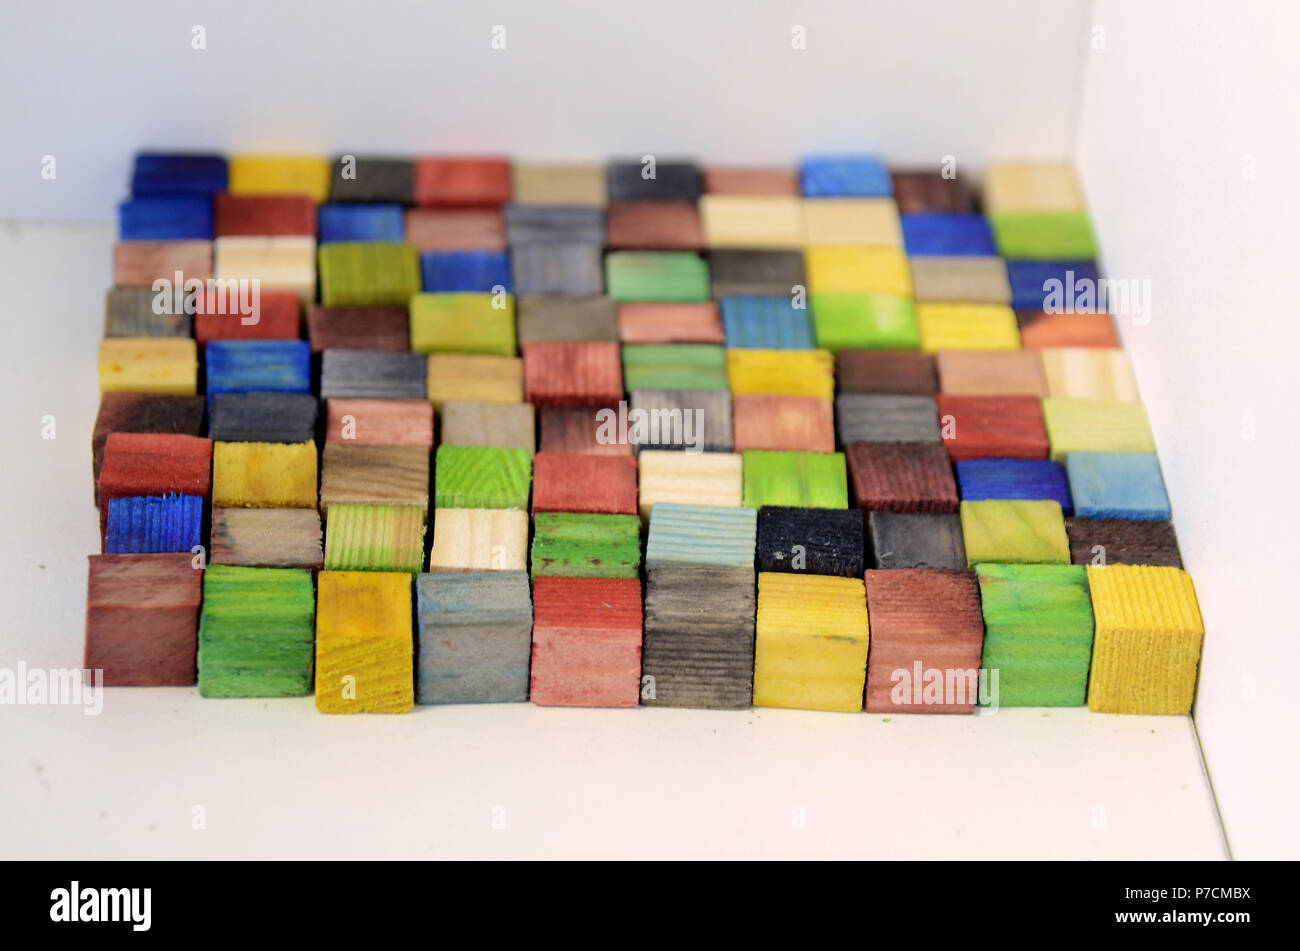 Surface made of colorful woodn bricks, each of a size of 1x1x1 cm, the surface consists of 100 of these cubes, so the upward floorage is 100 cm^2 Stock Photo